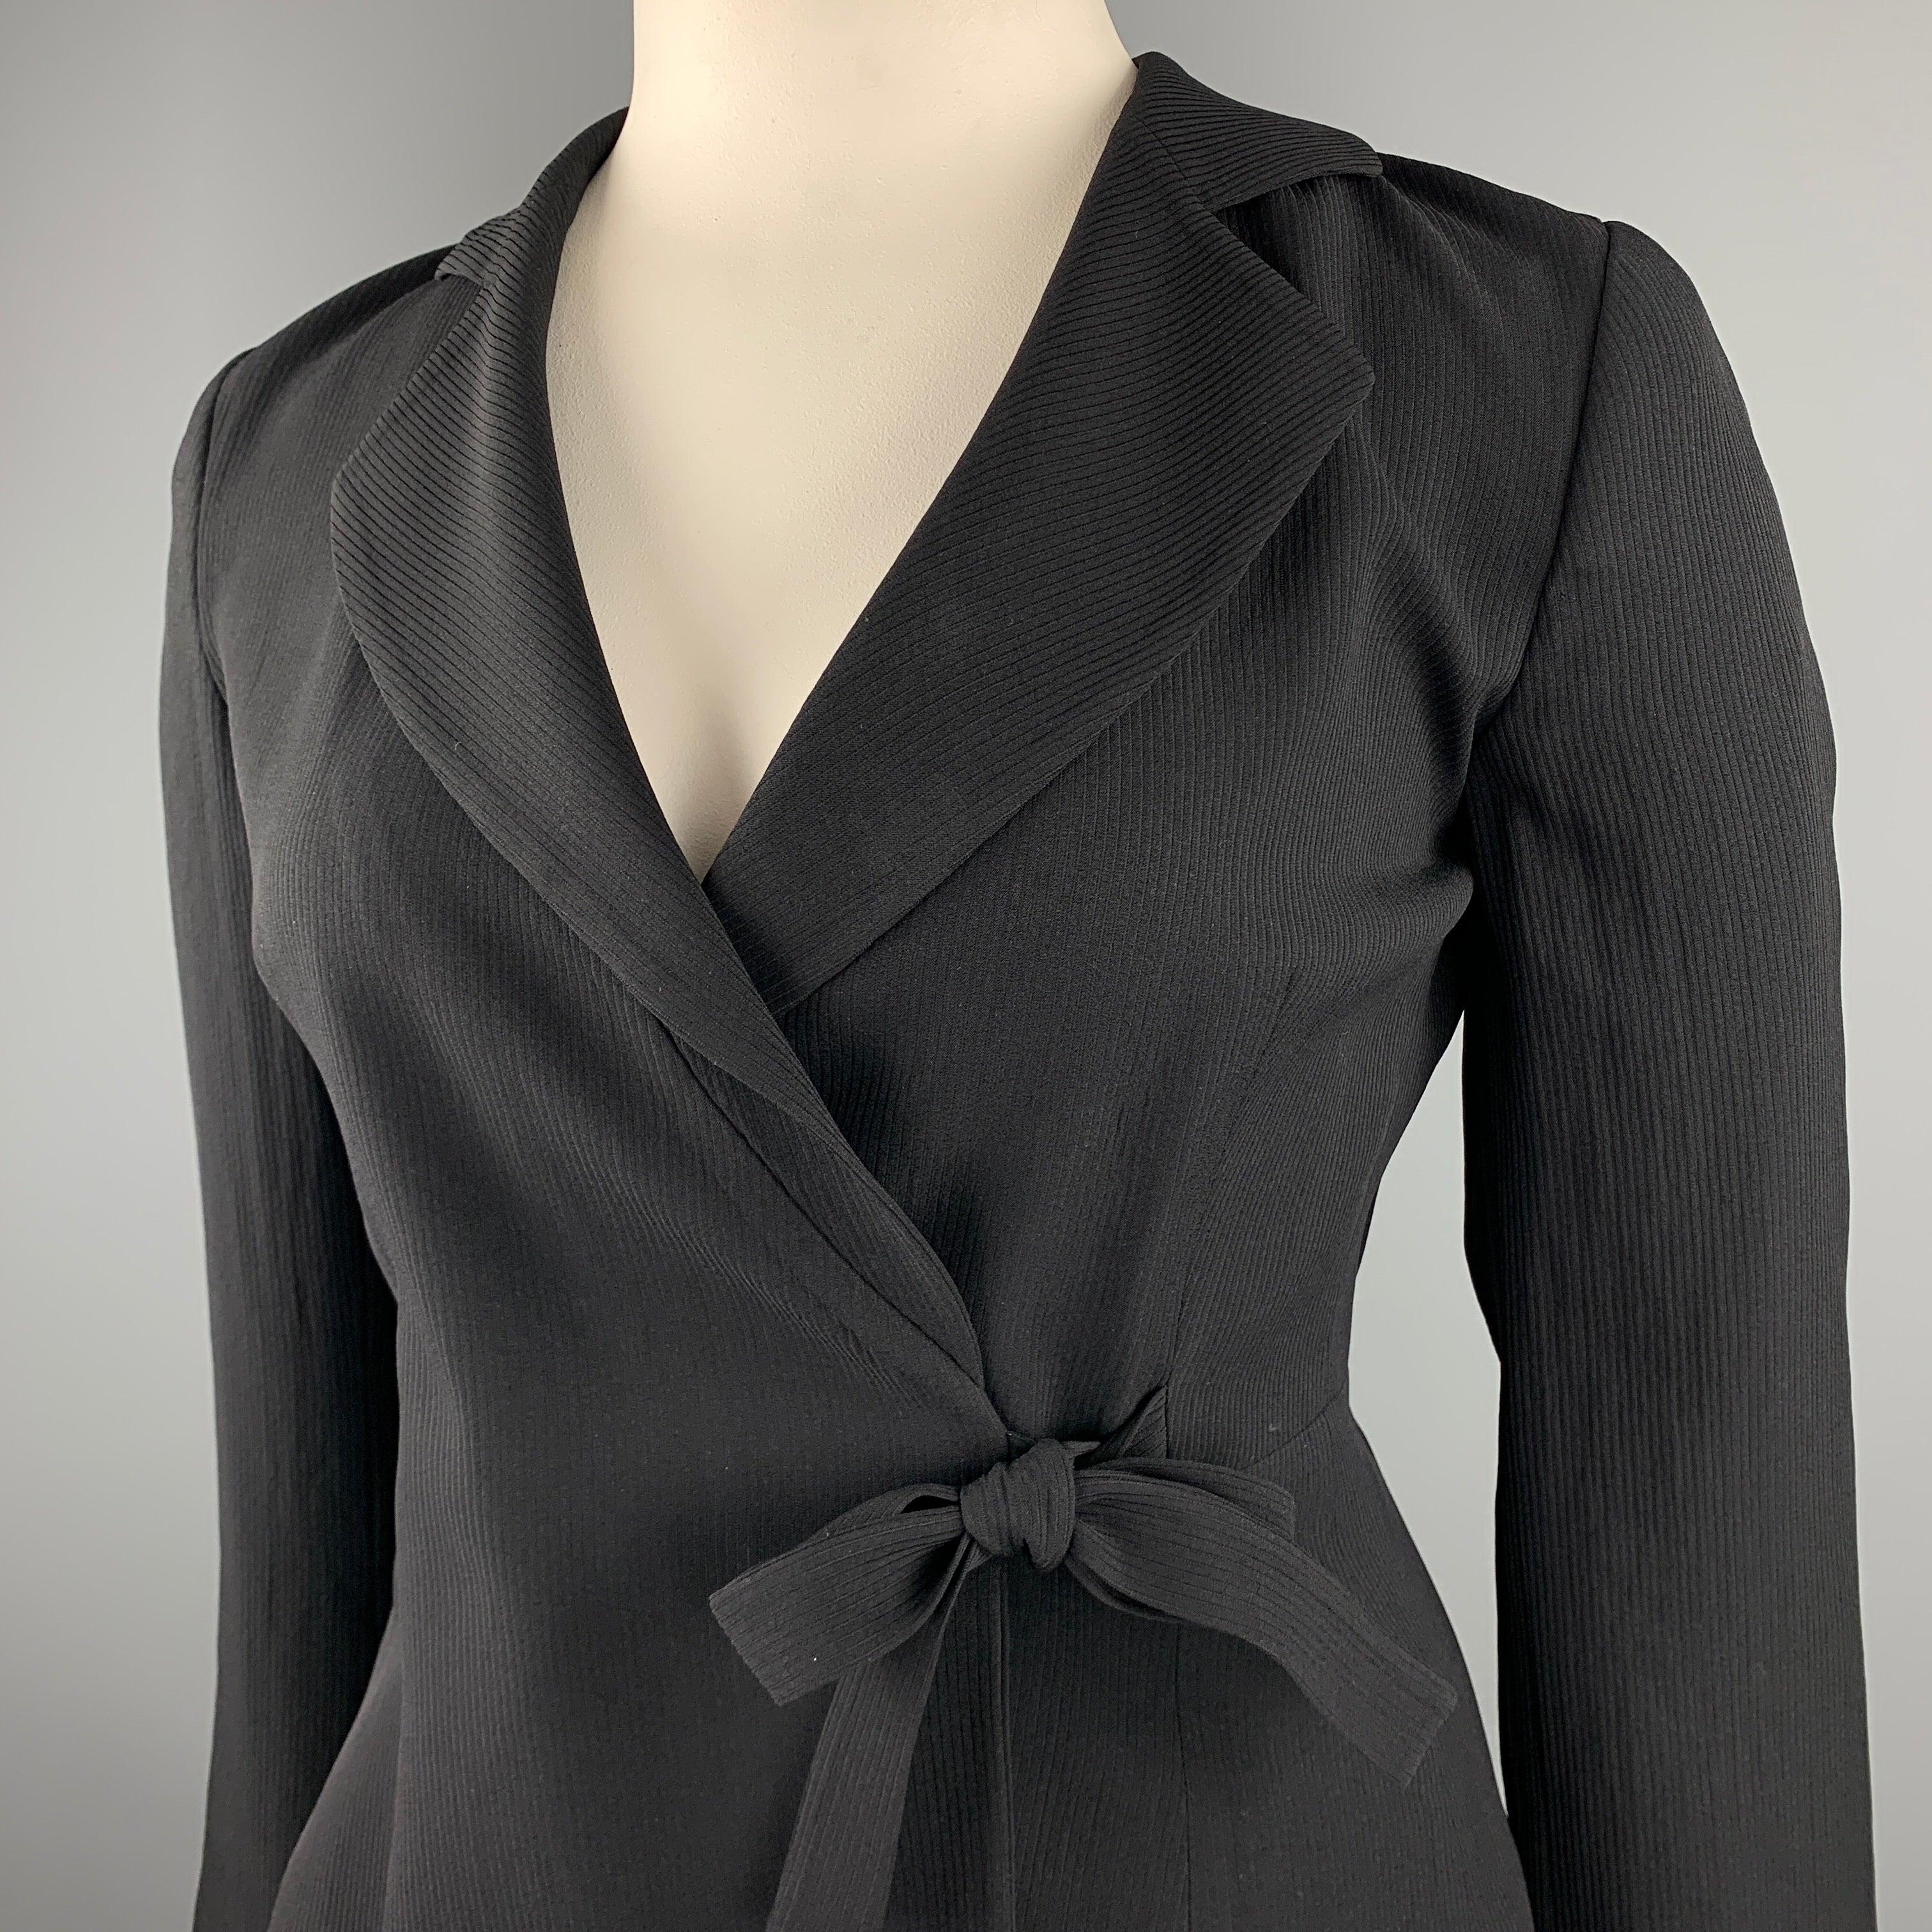 GIORGIO ARMANI jacket comes in a black ribbed triacetate blend with a full liner featuring a notch lapel, tie at waist detail, and a single button closure.
Very Good
Pre-Owned Condition. 

Marked:   IT 44 

Measurements: 
 
Shoulder: 16 inches Bust: